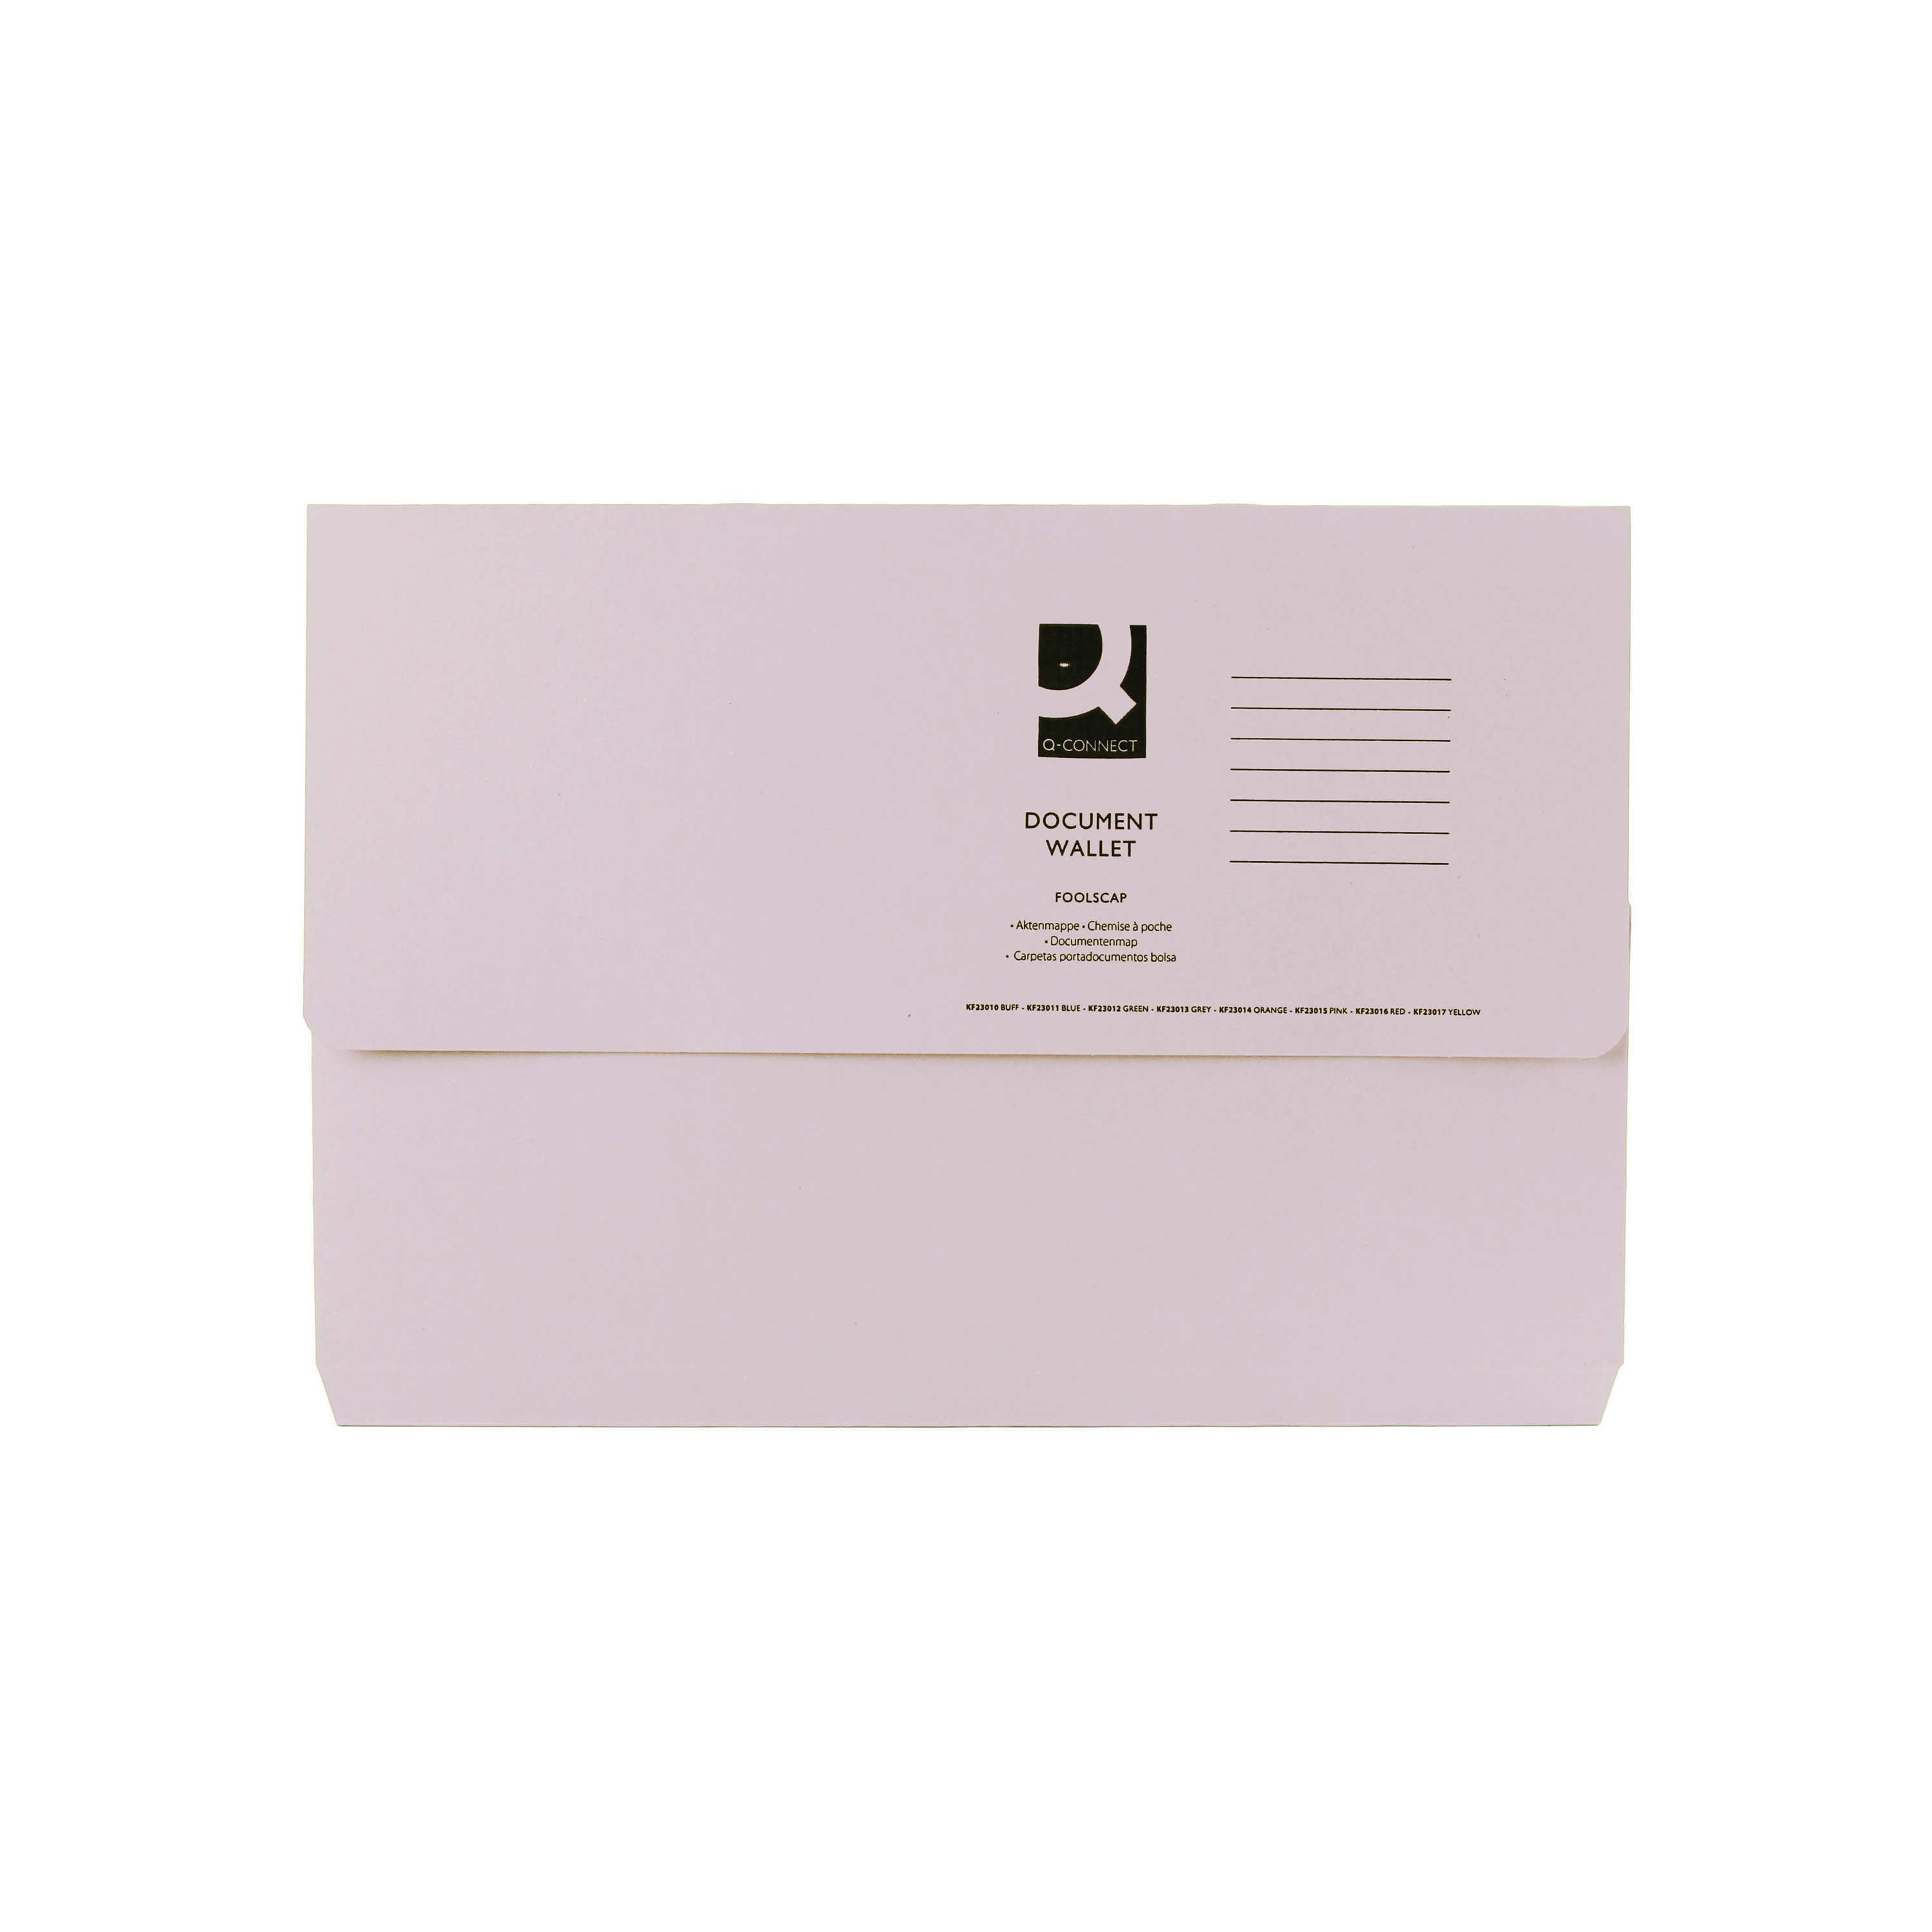 Q-Connect+Document+Wallet+Foolscap+Buff+285gsm+%2850+Pack%29+KF23010